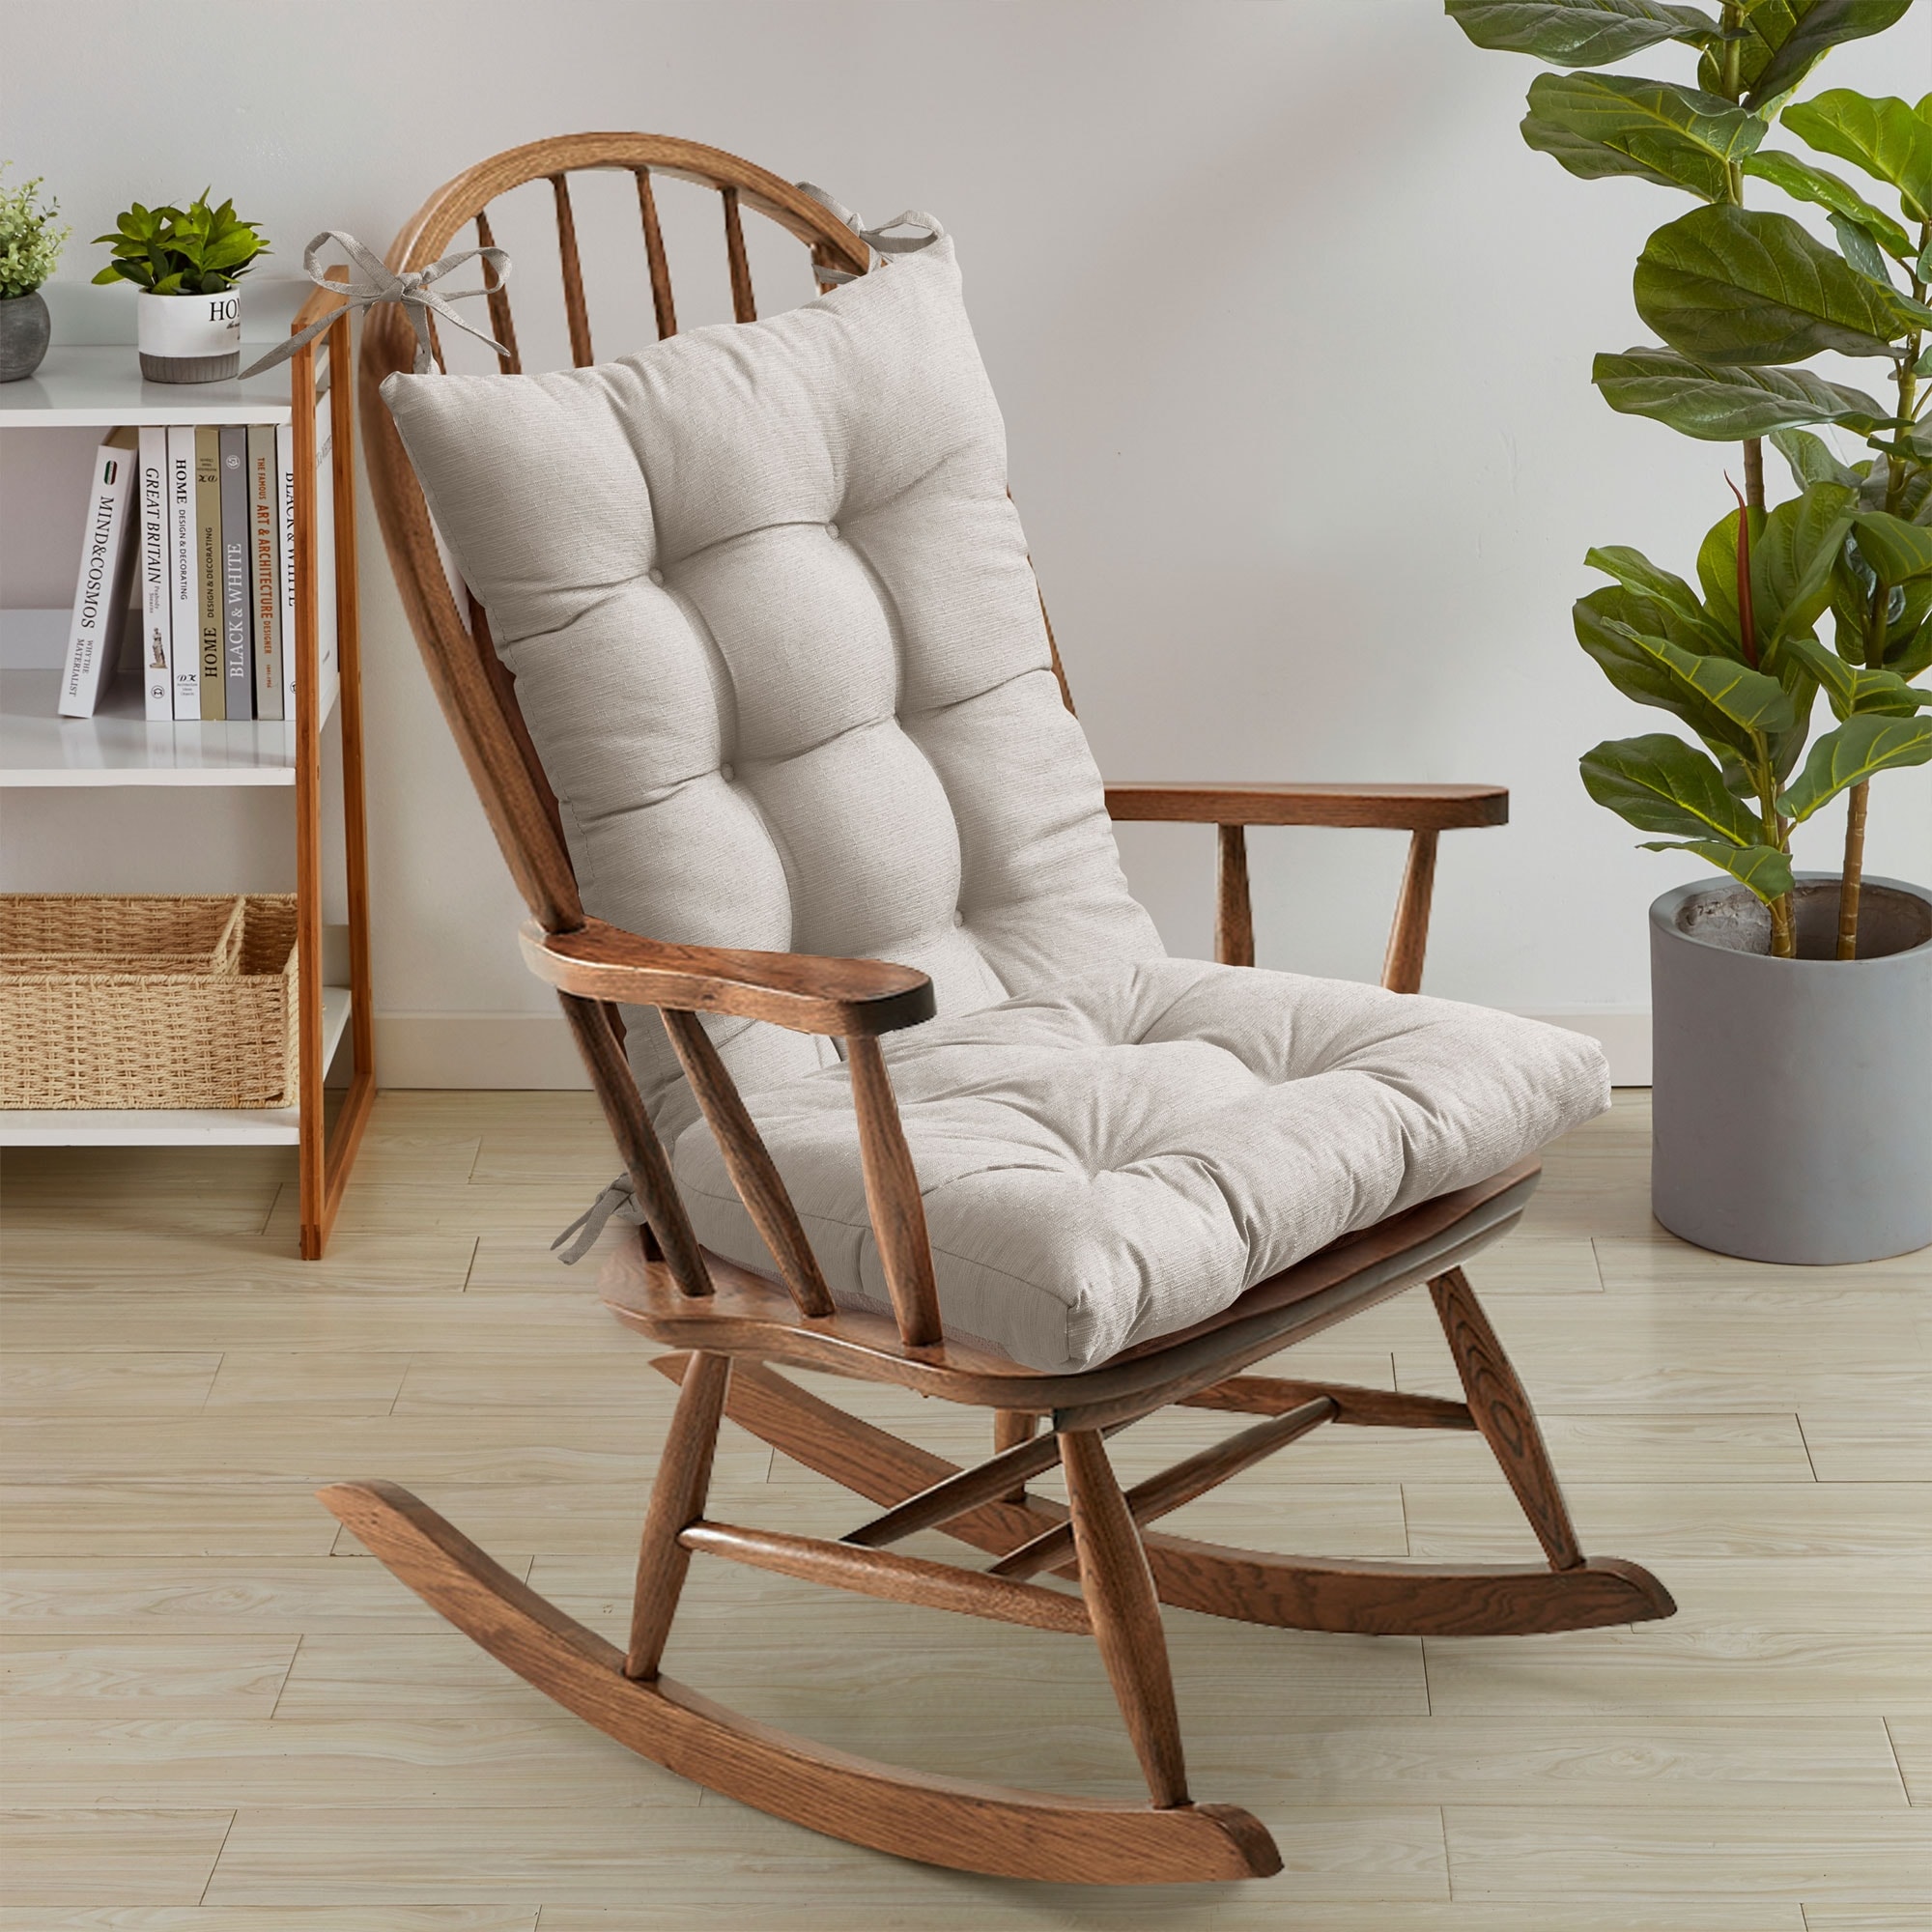 https://ak1.ostkcdn.com/images/products/is/images/direct/792749196d3272e517e0e2661668008ecb7e2aef/Sweet-Home-Collection-Rocking-Chair-Cushion-Set.jpg